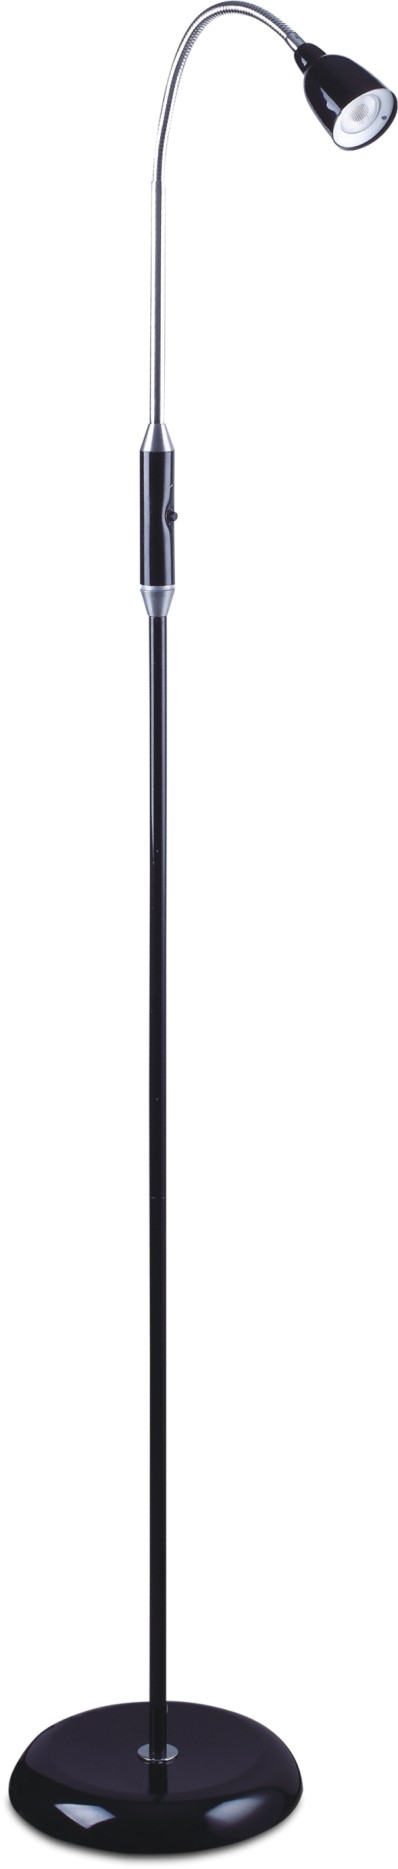 Home Office Hotel LED Floor Lamps